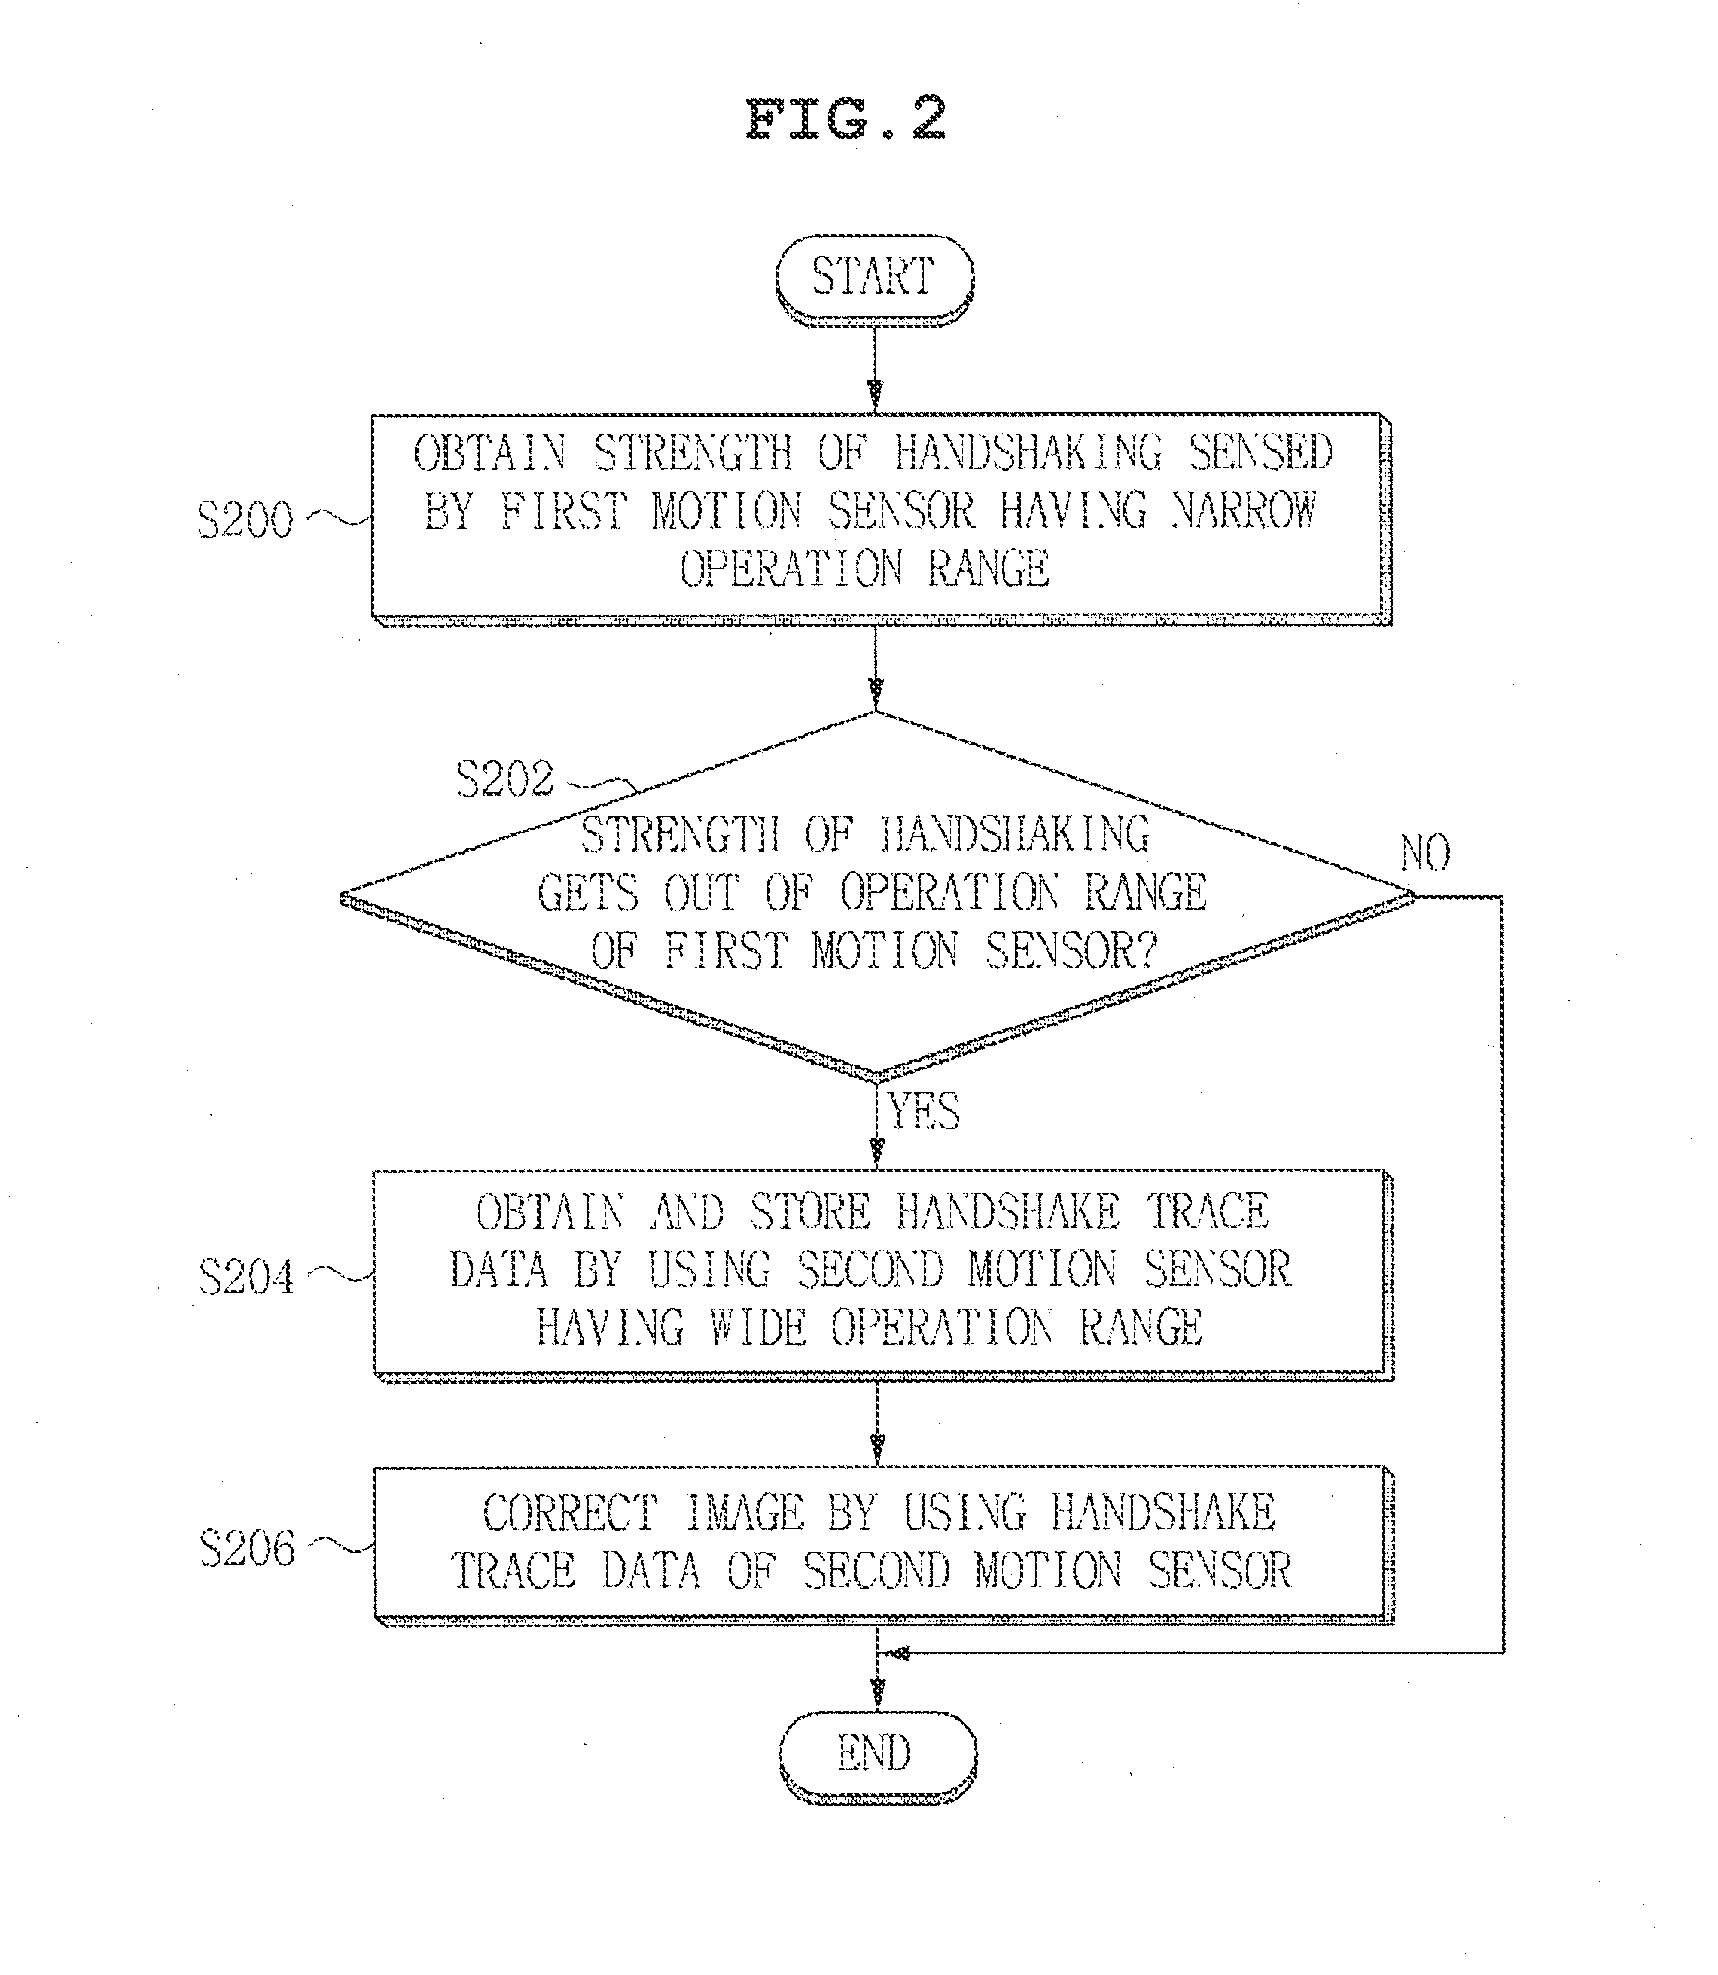 Image correcting apparatus and method for imaging device